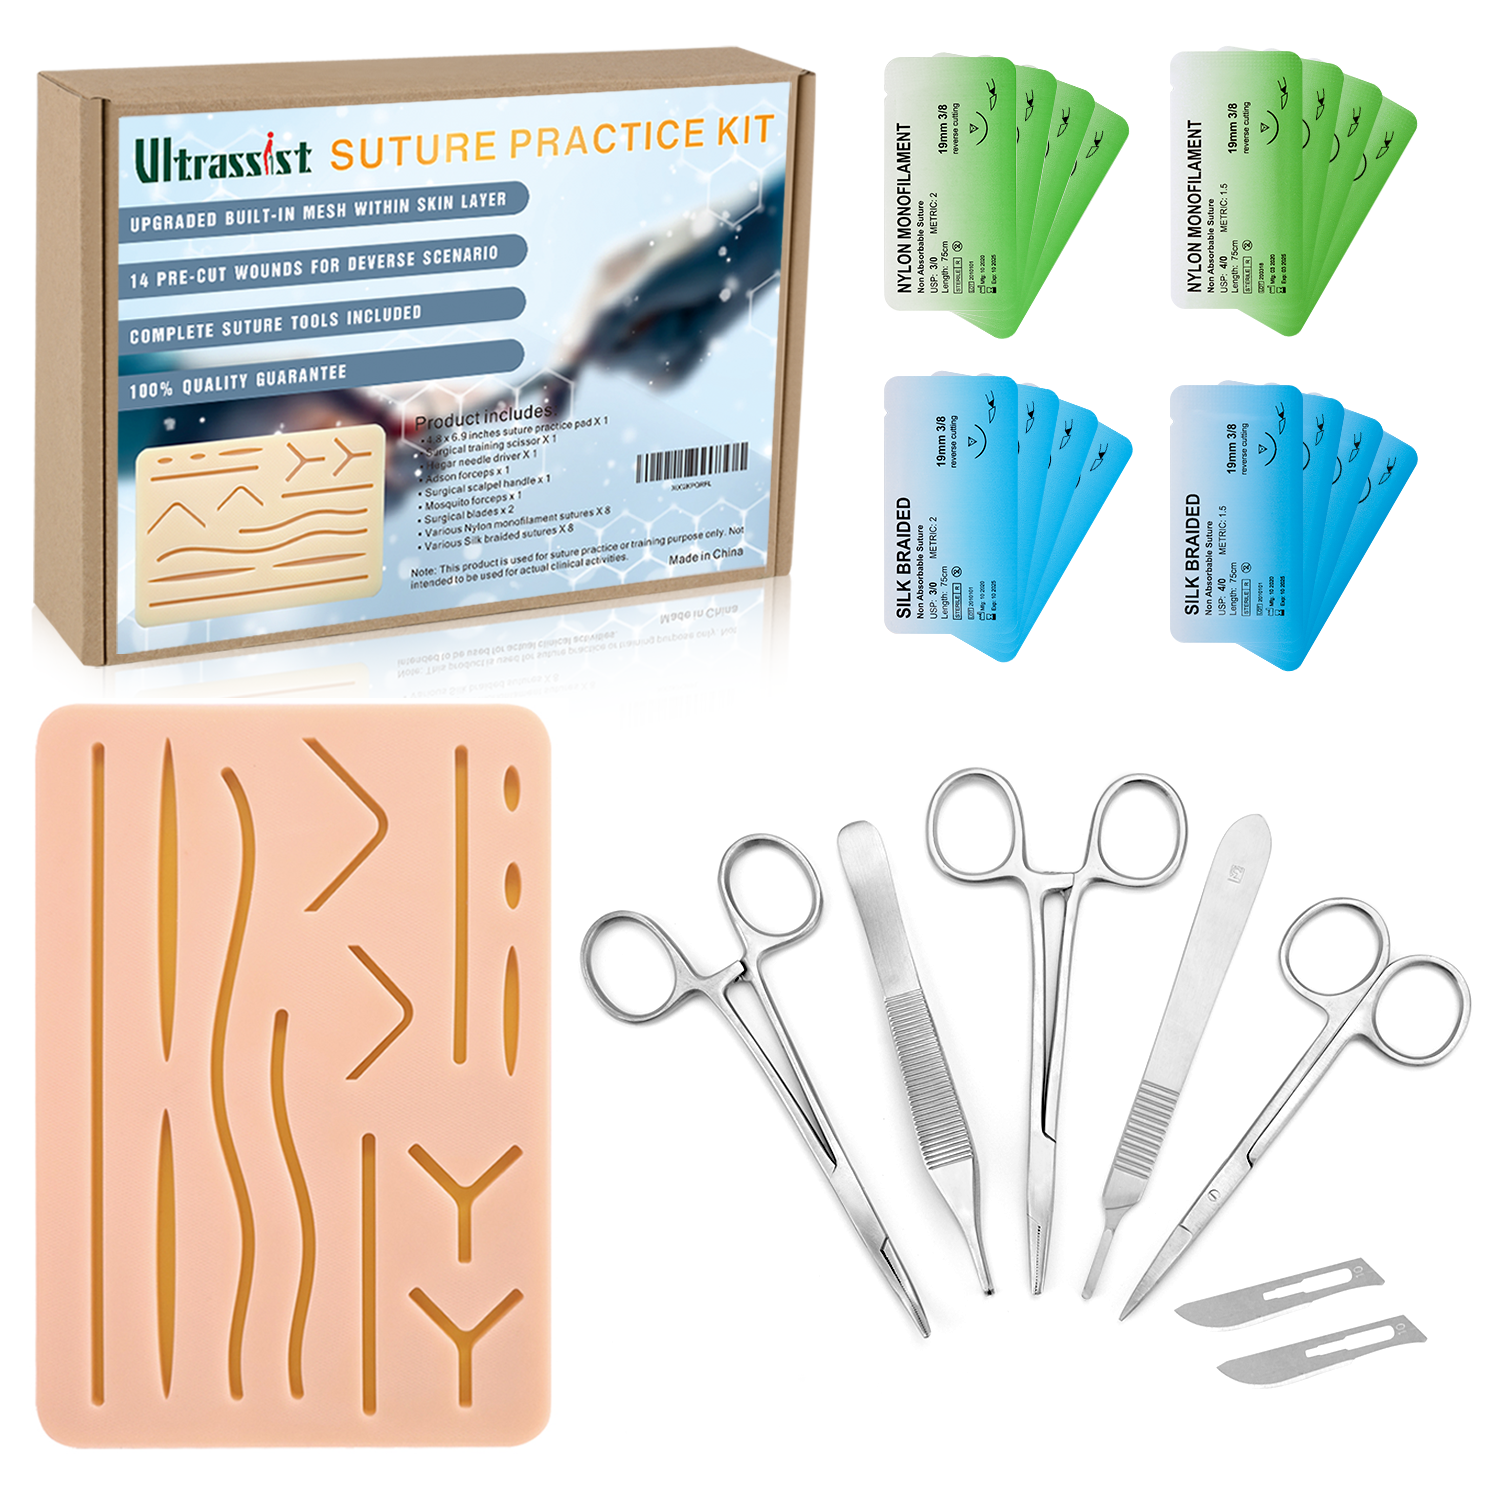 41 Piece Practice Suture Kit for Medical and Veterinary Student Training